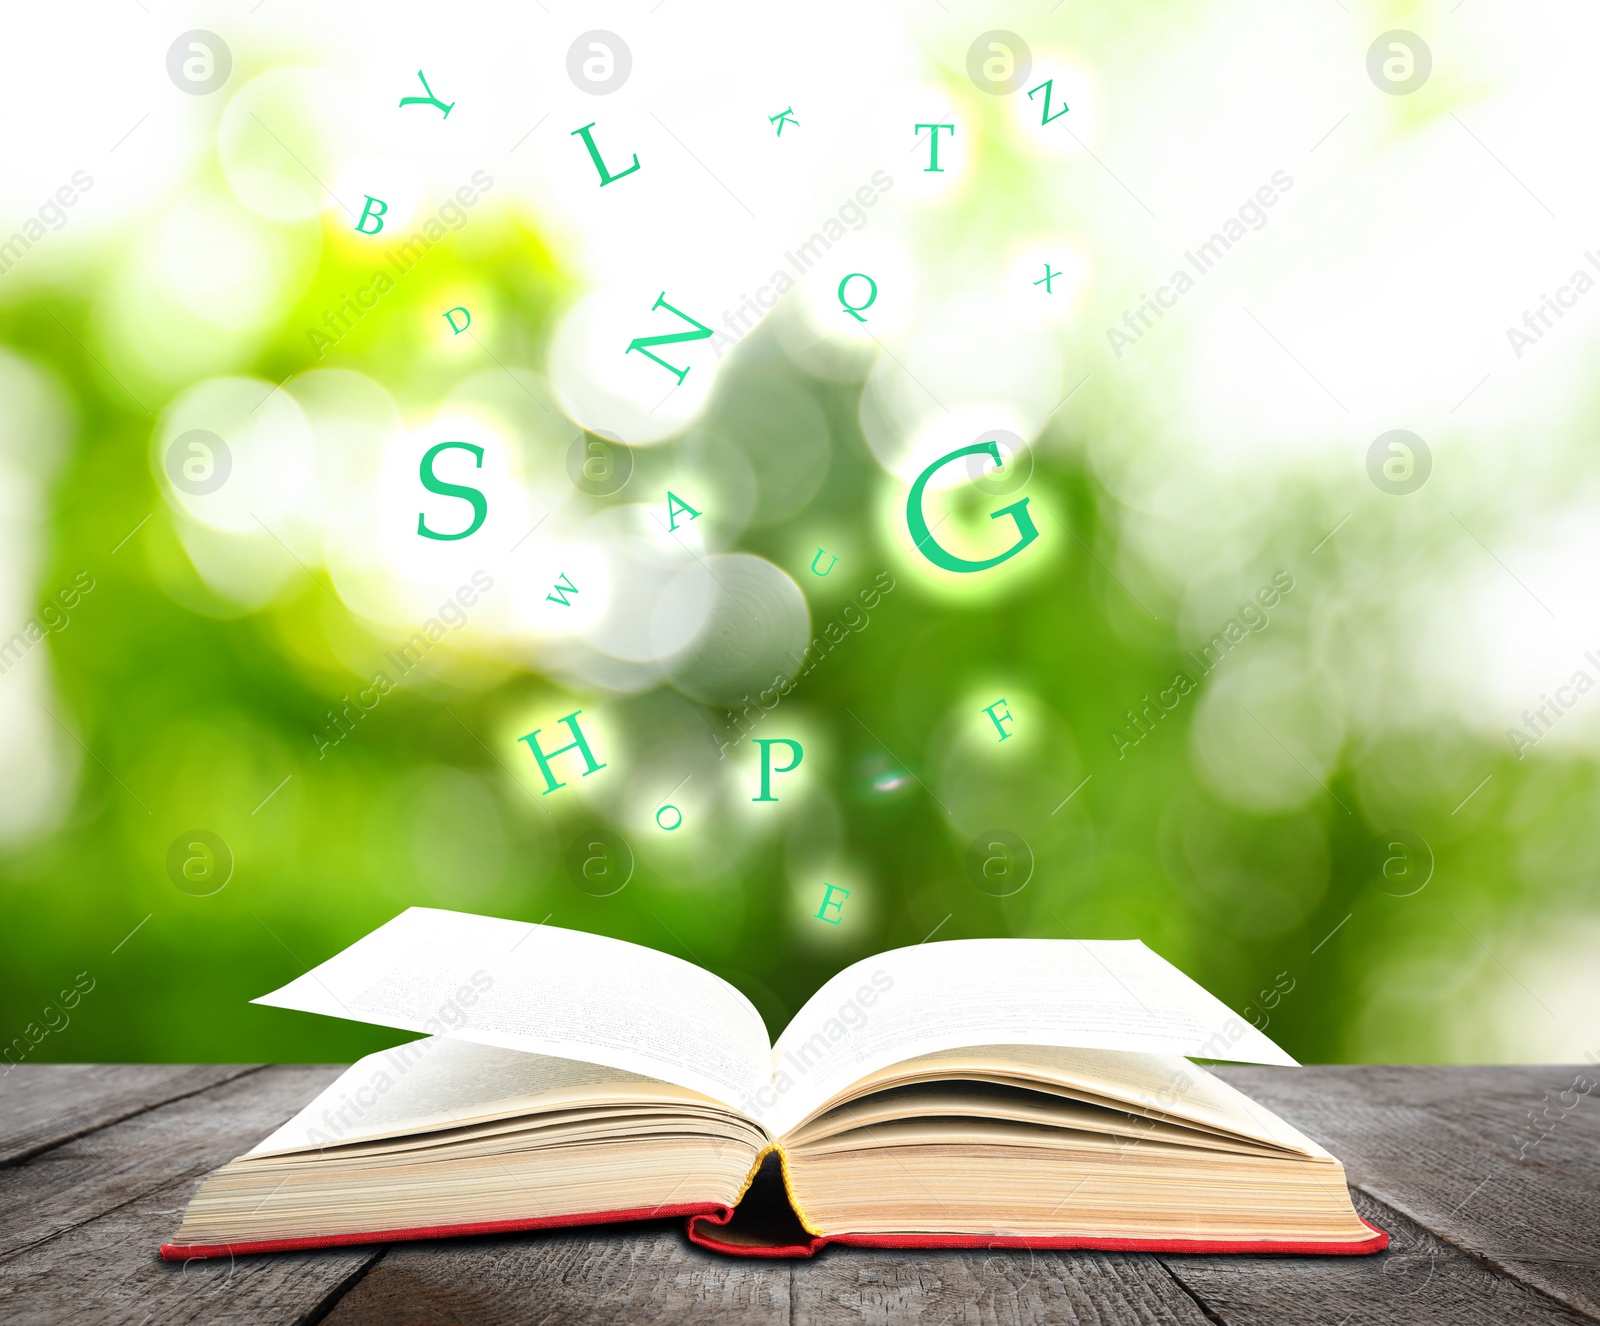 Image of Open book with letters flying out of it on wooden table against blurred background